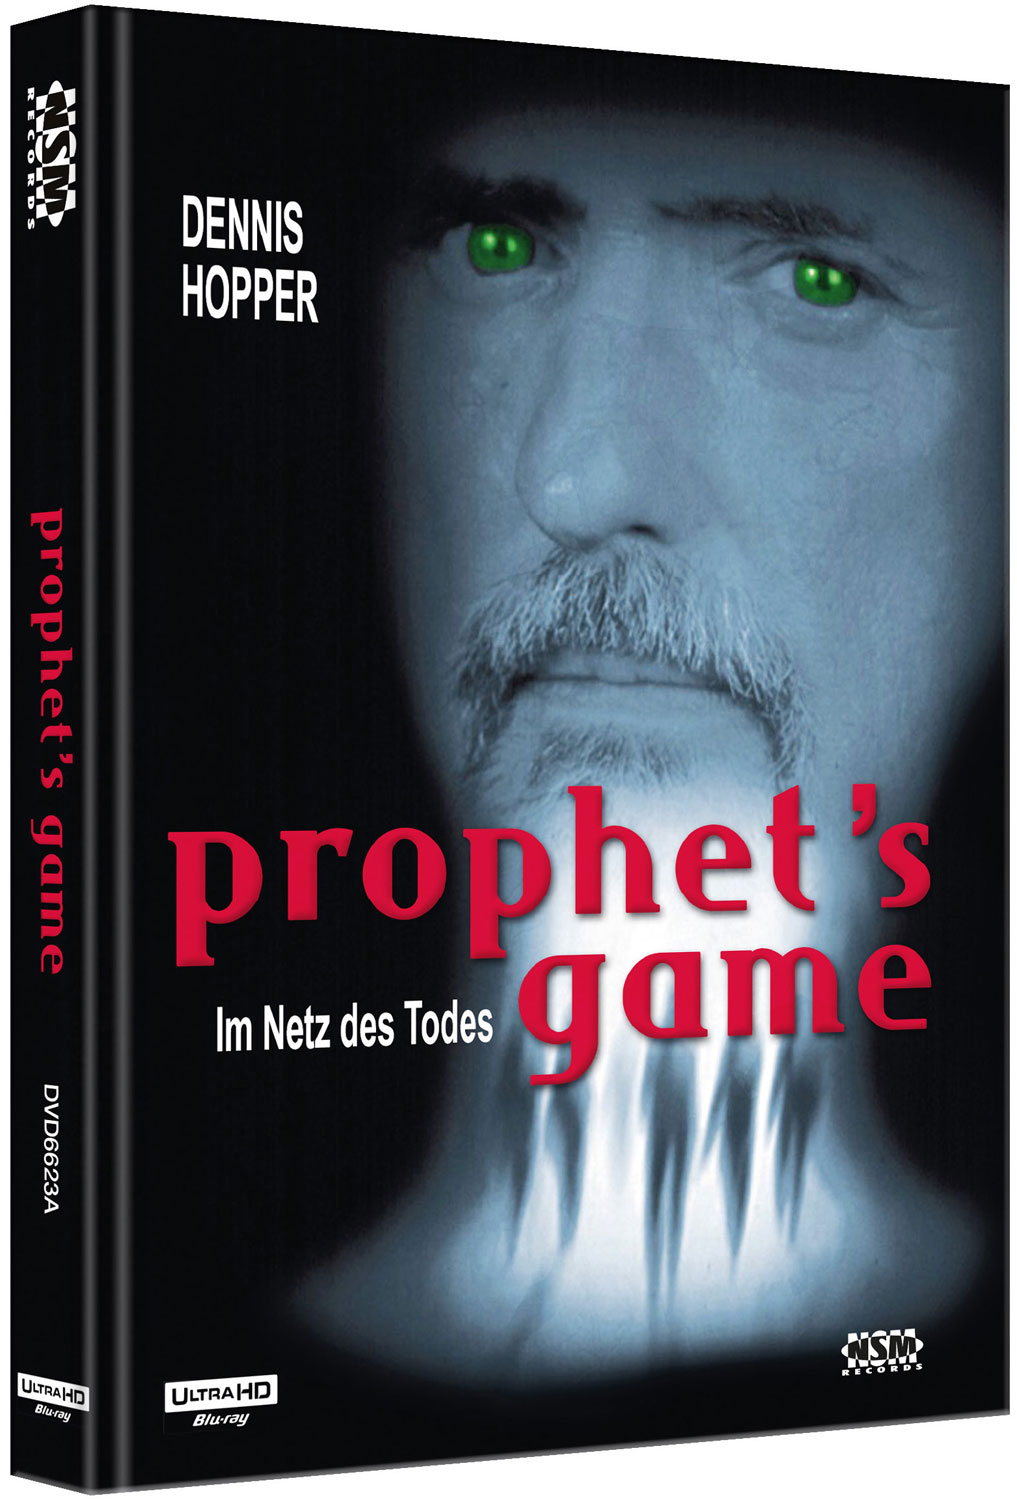 PROPHETS GAME - IM NETZ DES TODES (4K UHD+Blu-Ray+DVD) - Cover A - Mediabook - Limited 111 Edition